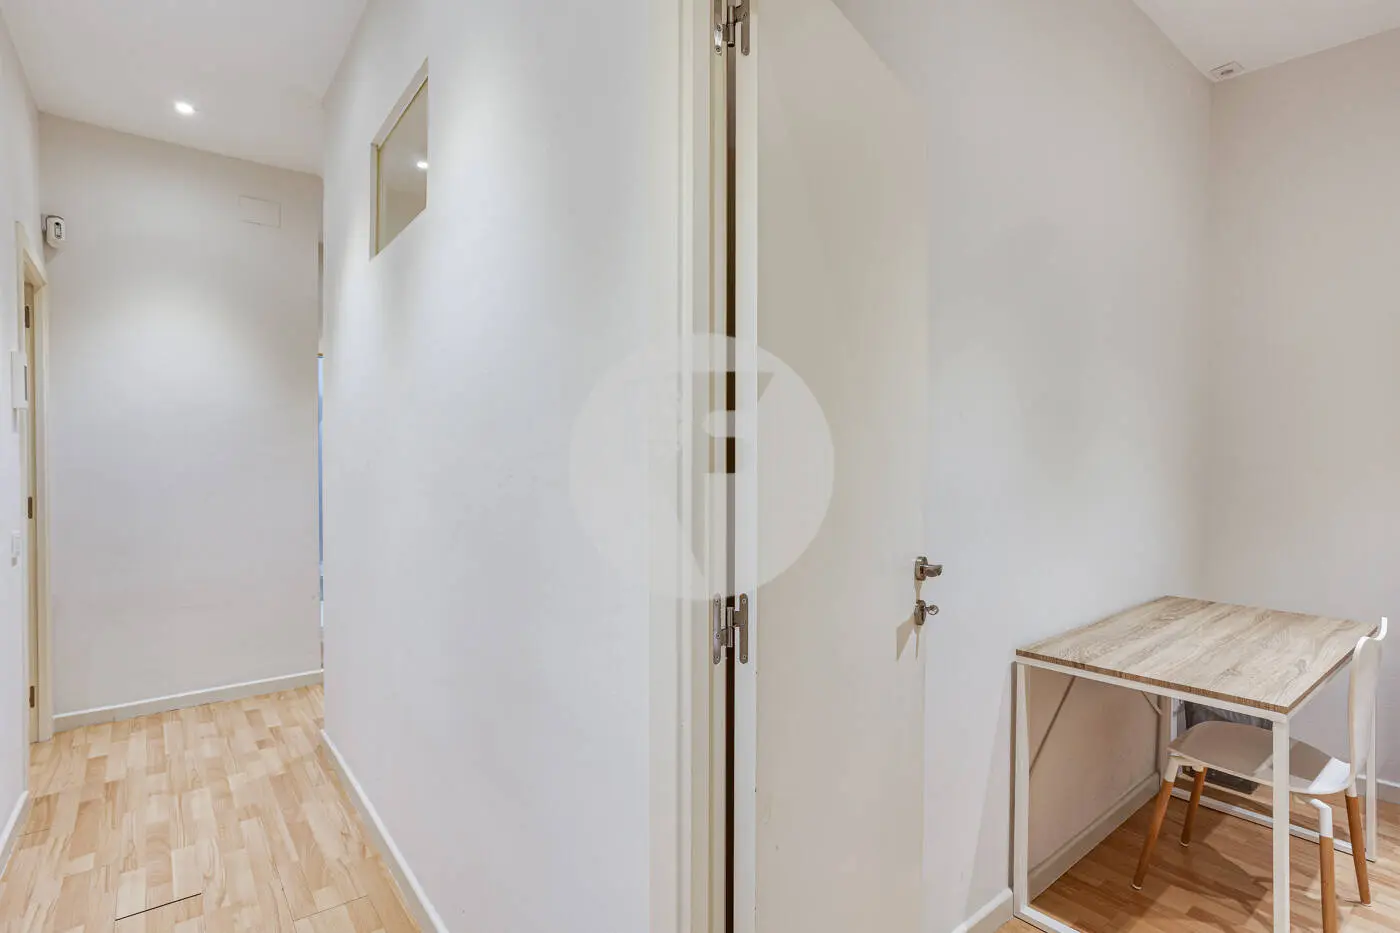 Magnificent apartment for sale next to Pl Universitat of 114m2 according to the land registry, located on Tallers Street in the Ciutat Vella neighborhood of Barcelona 21